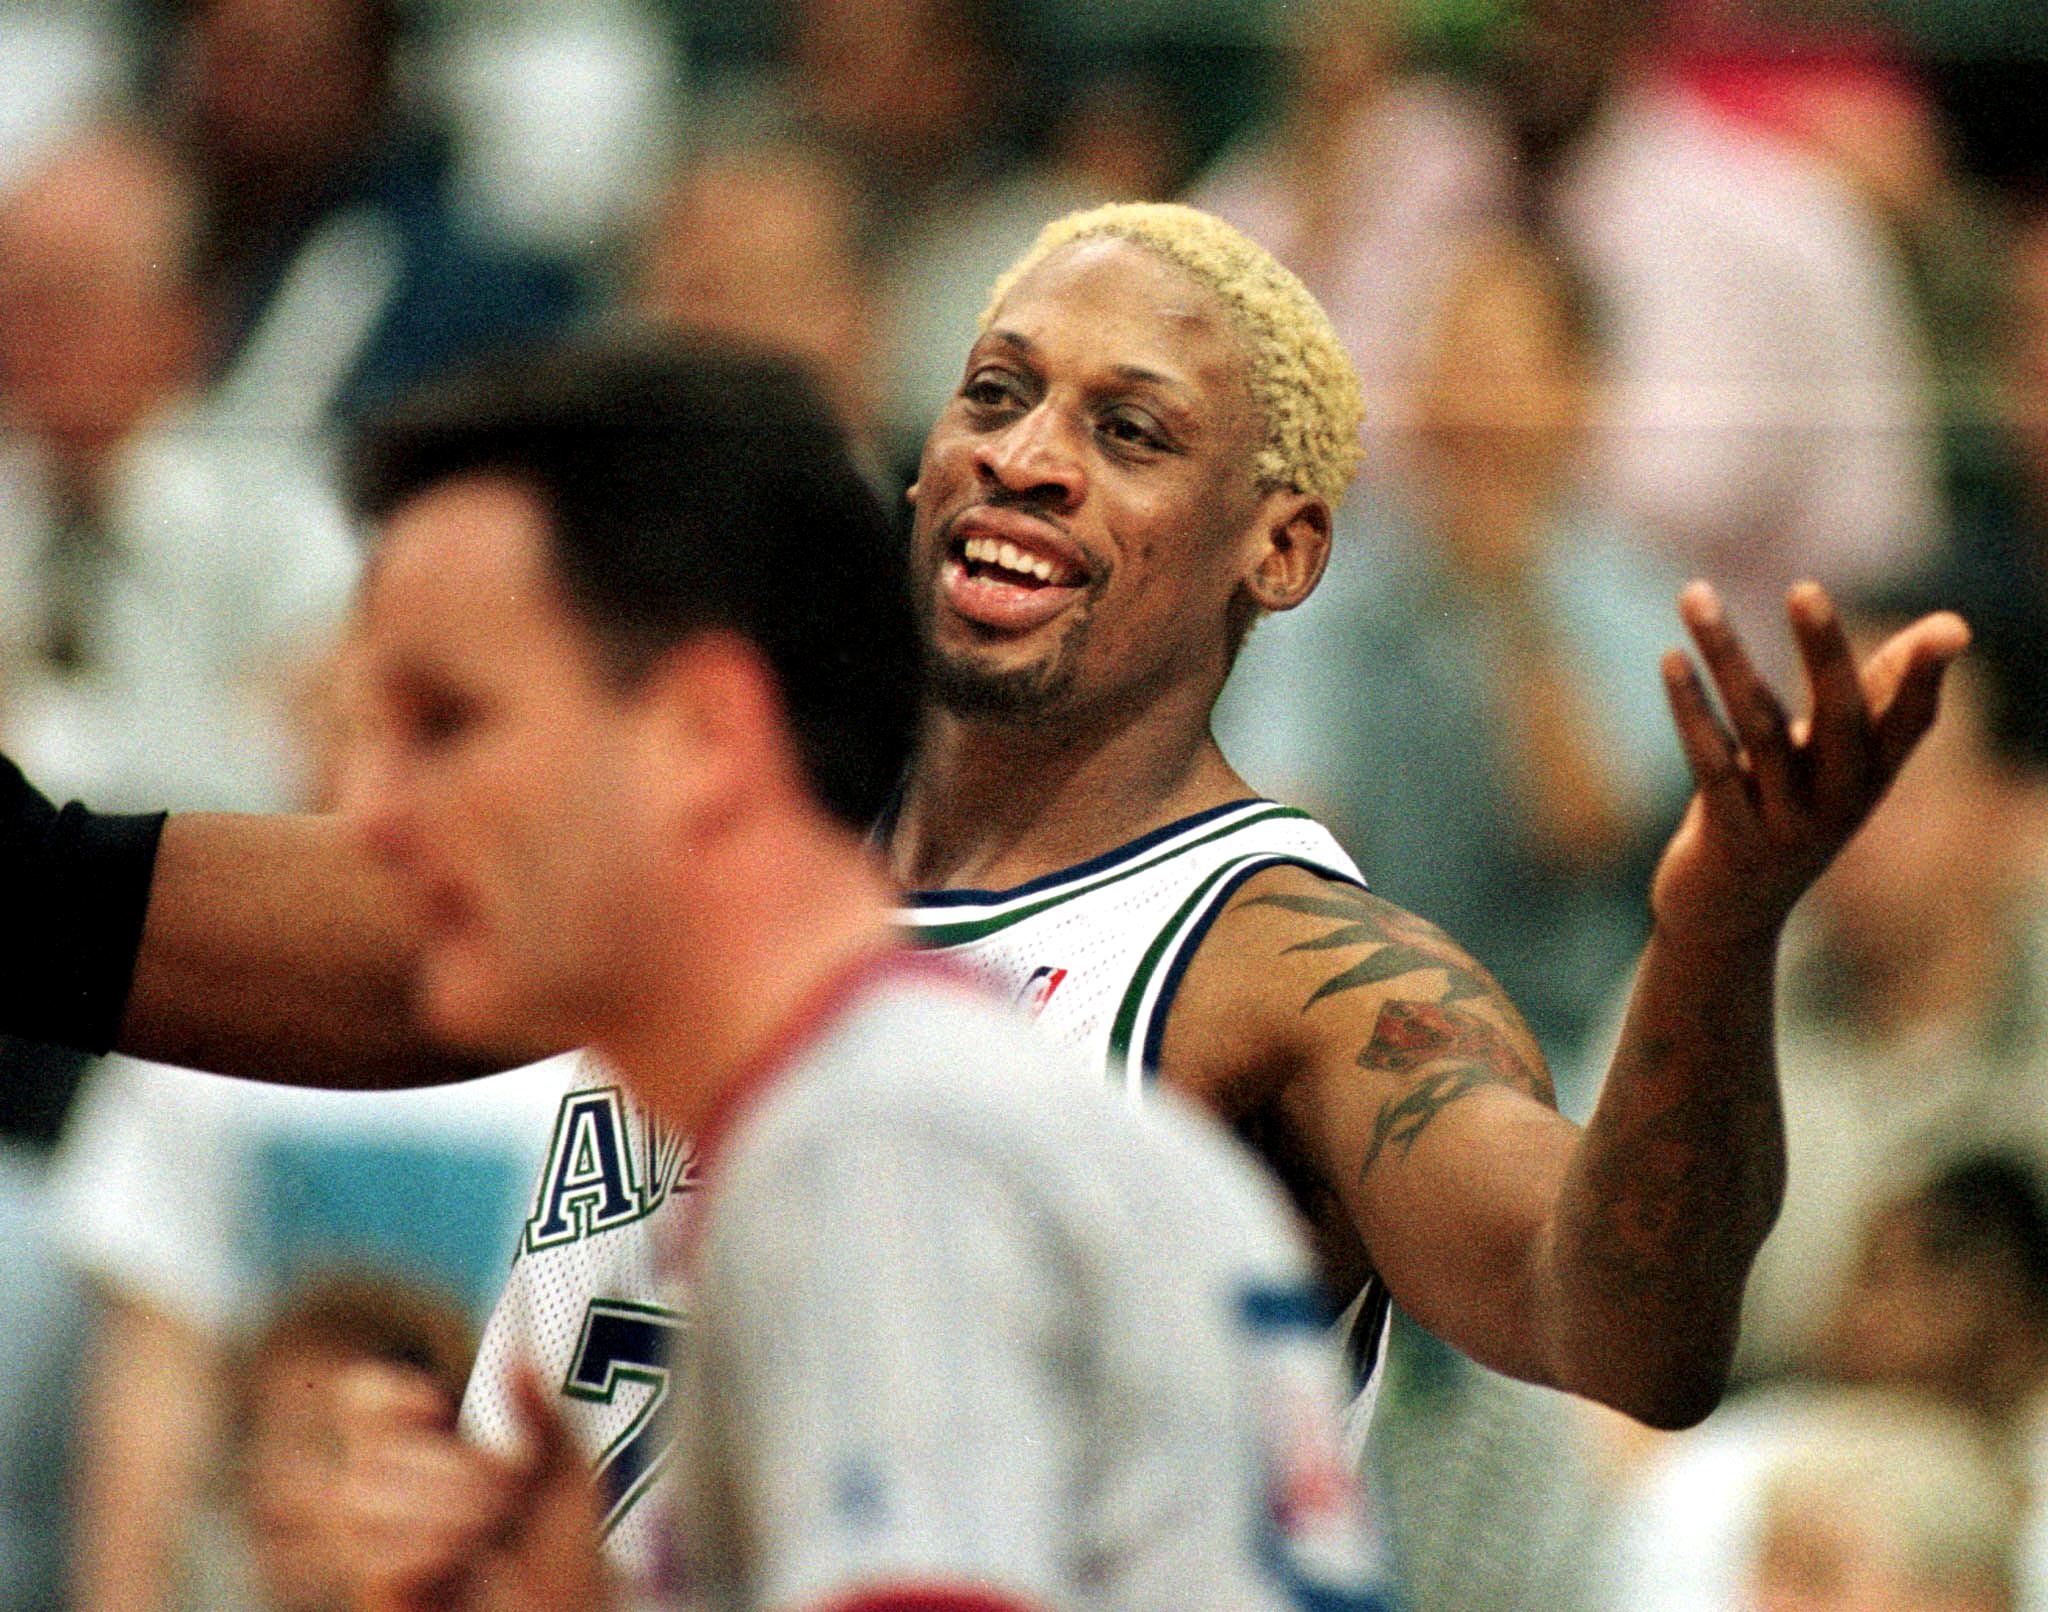 Dennis Rodman argues a call during an NBA game in February 2000